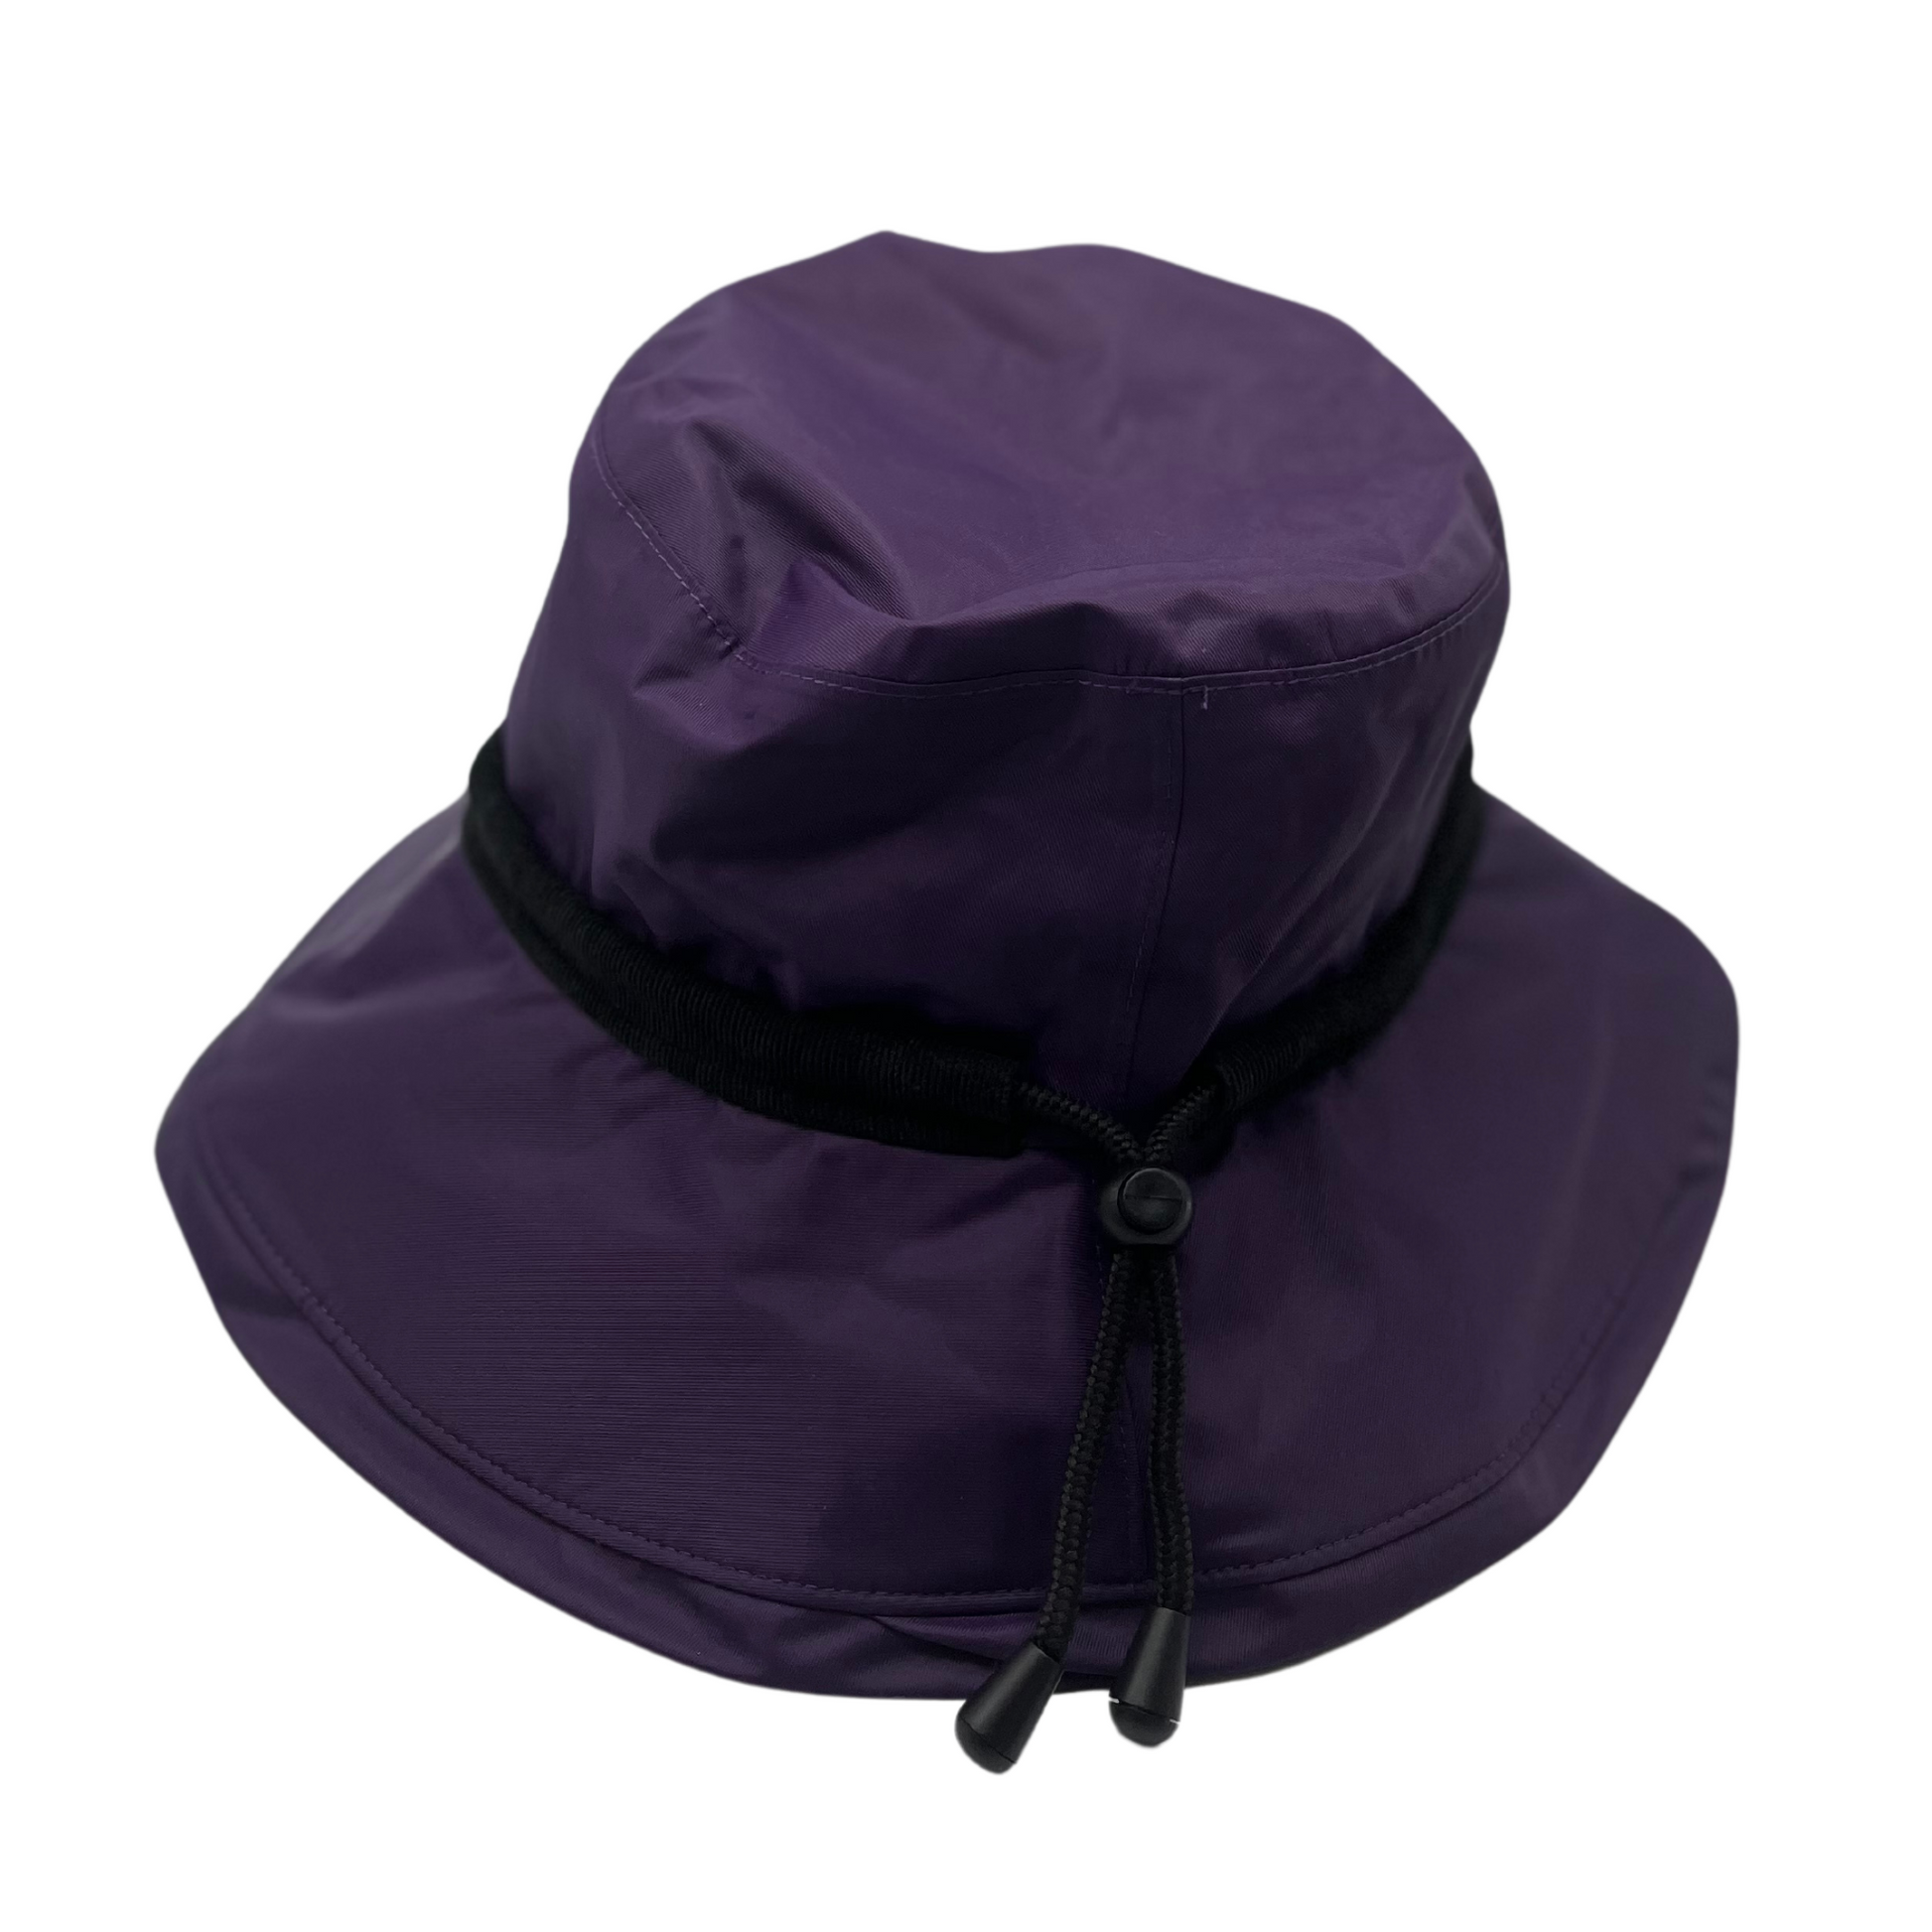 A front view of a purple hat with a black drawstring.